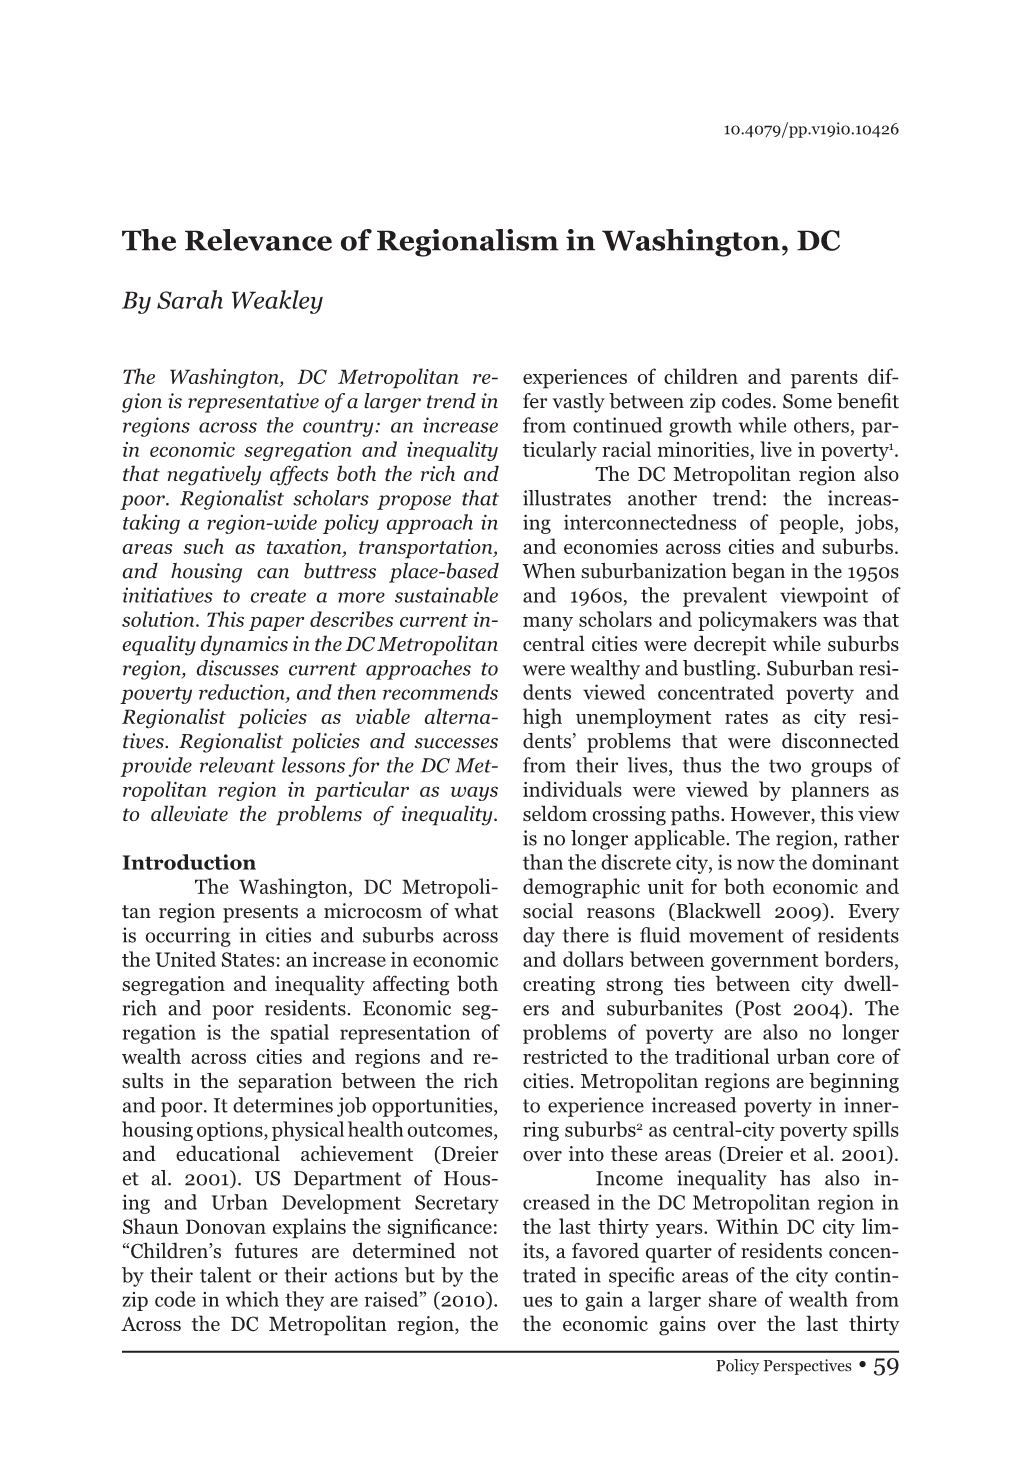 The Relevance of Regionalism in Washington, DC